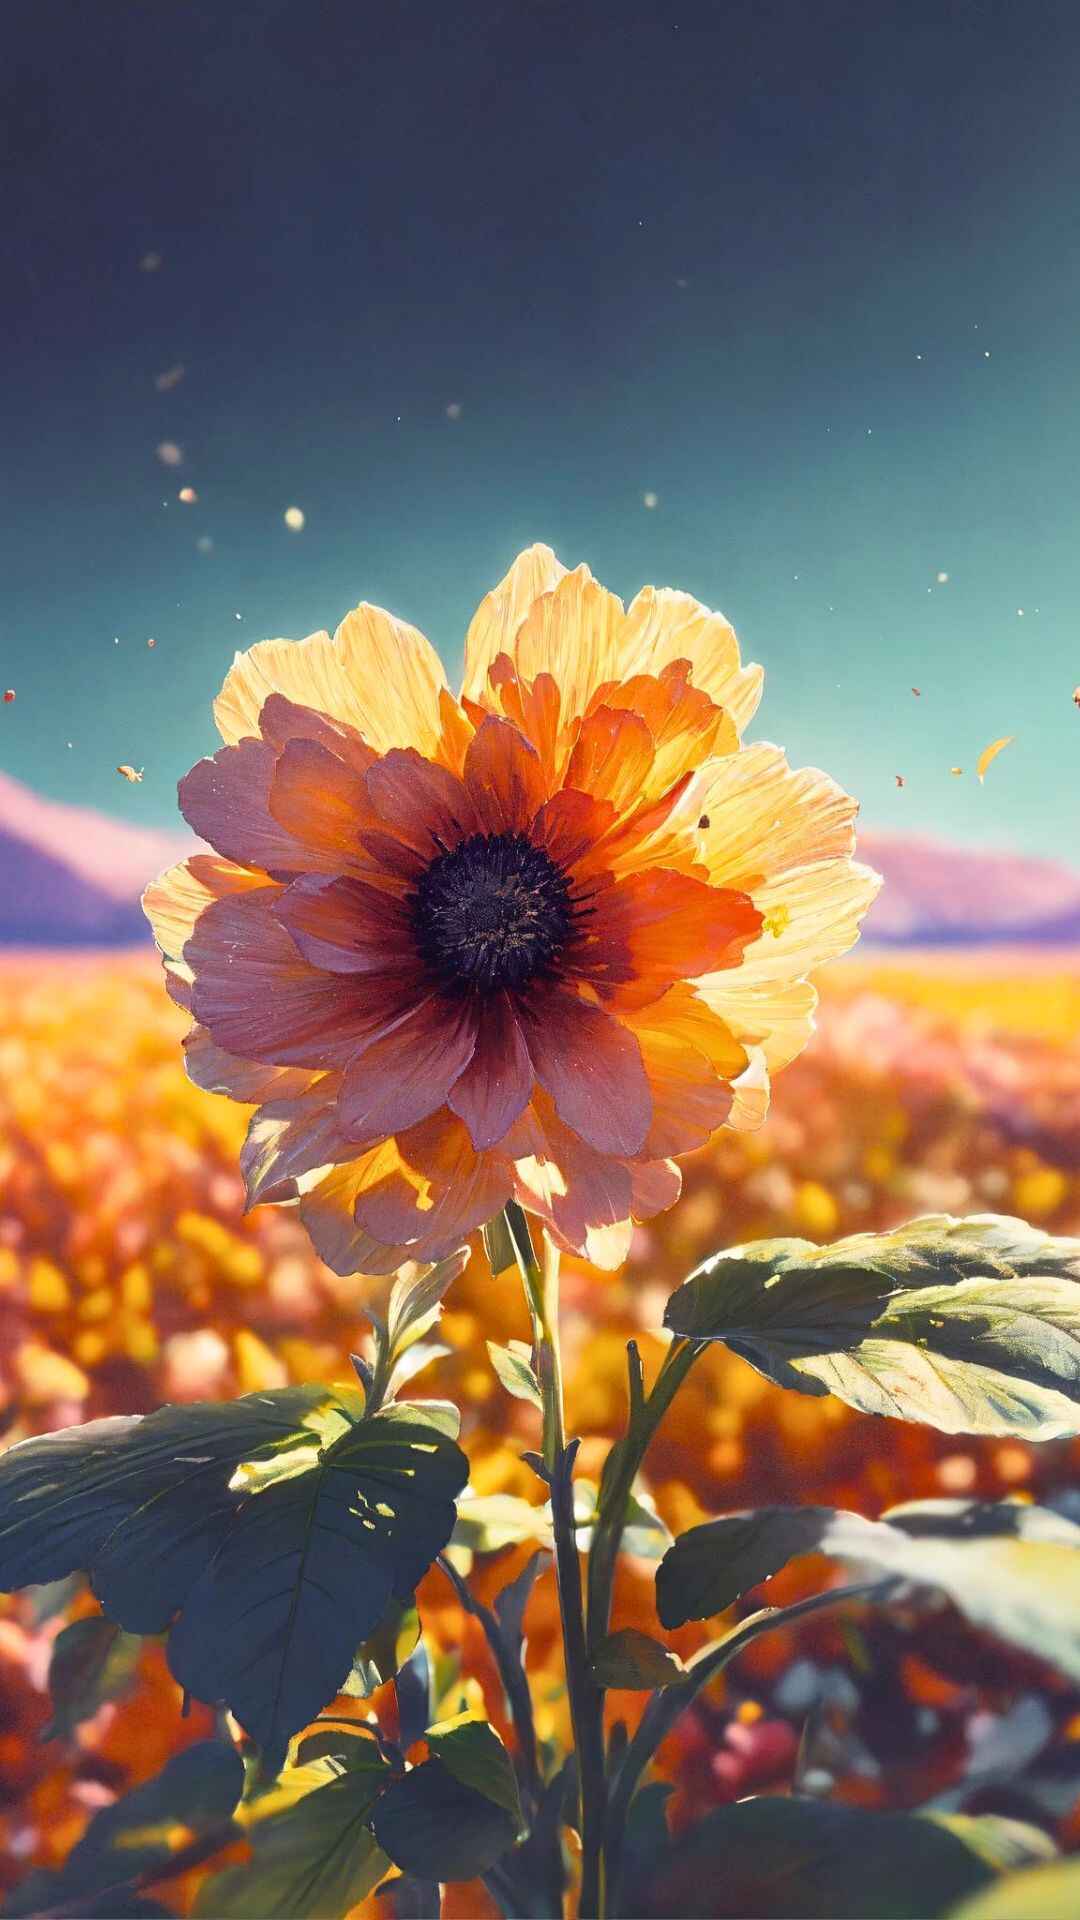 Sunflower Wallpaper Android